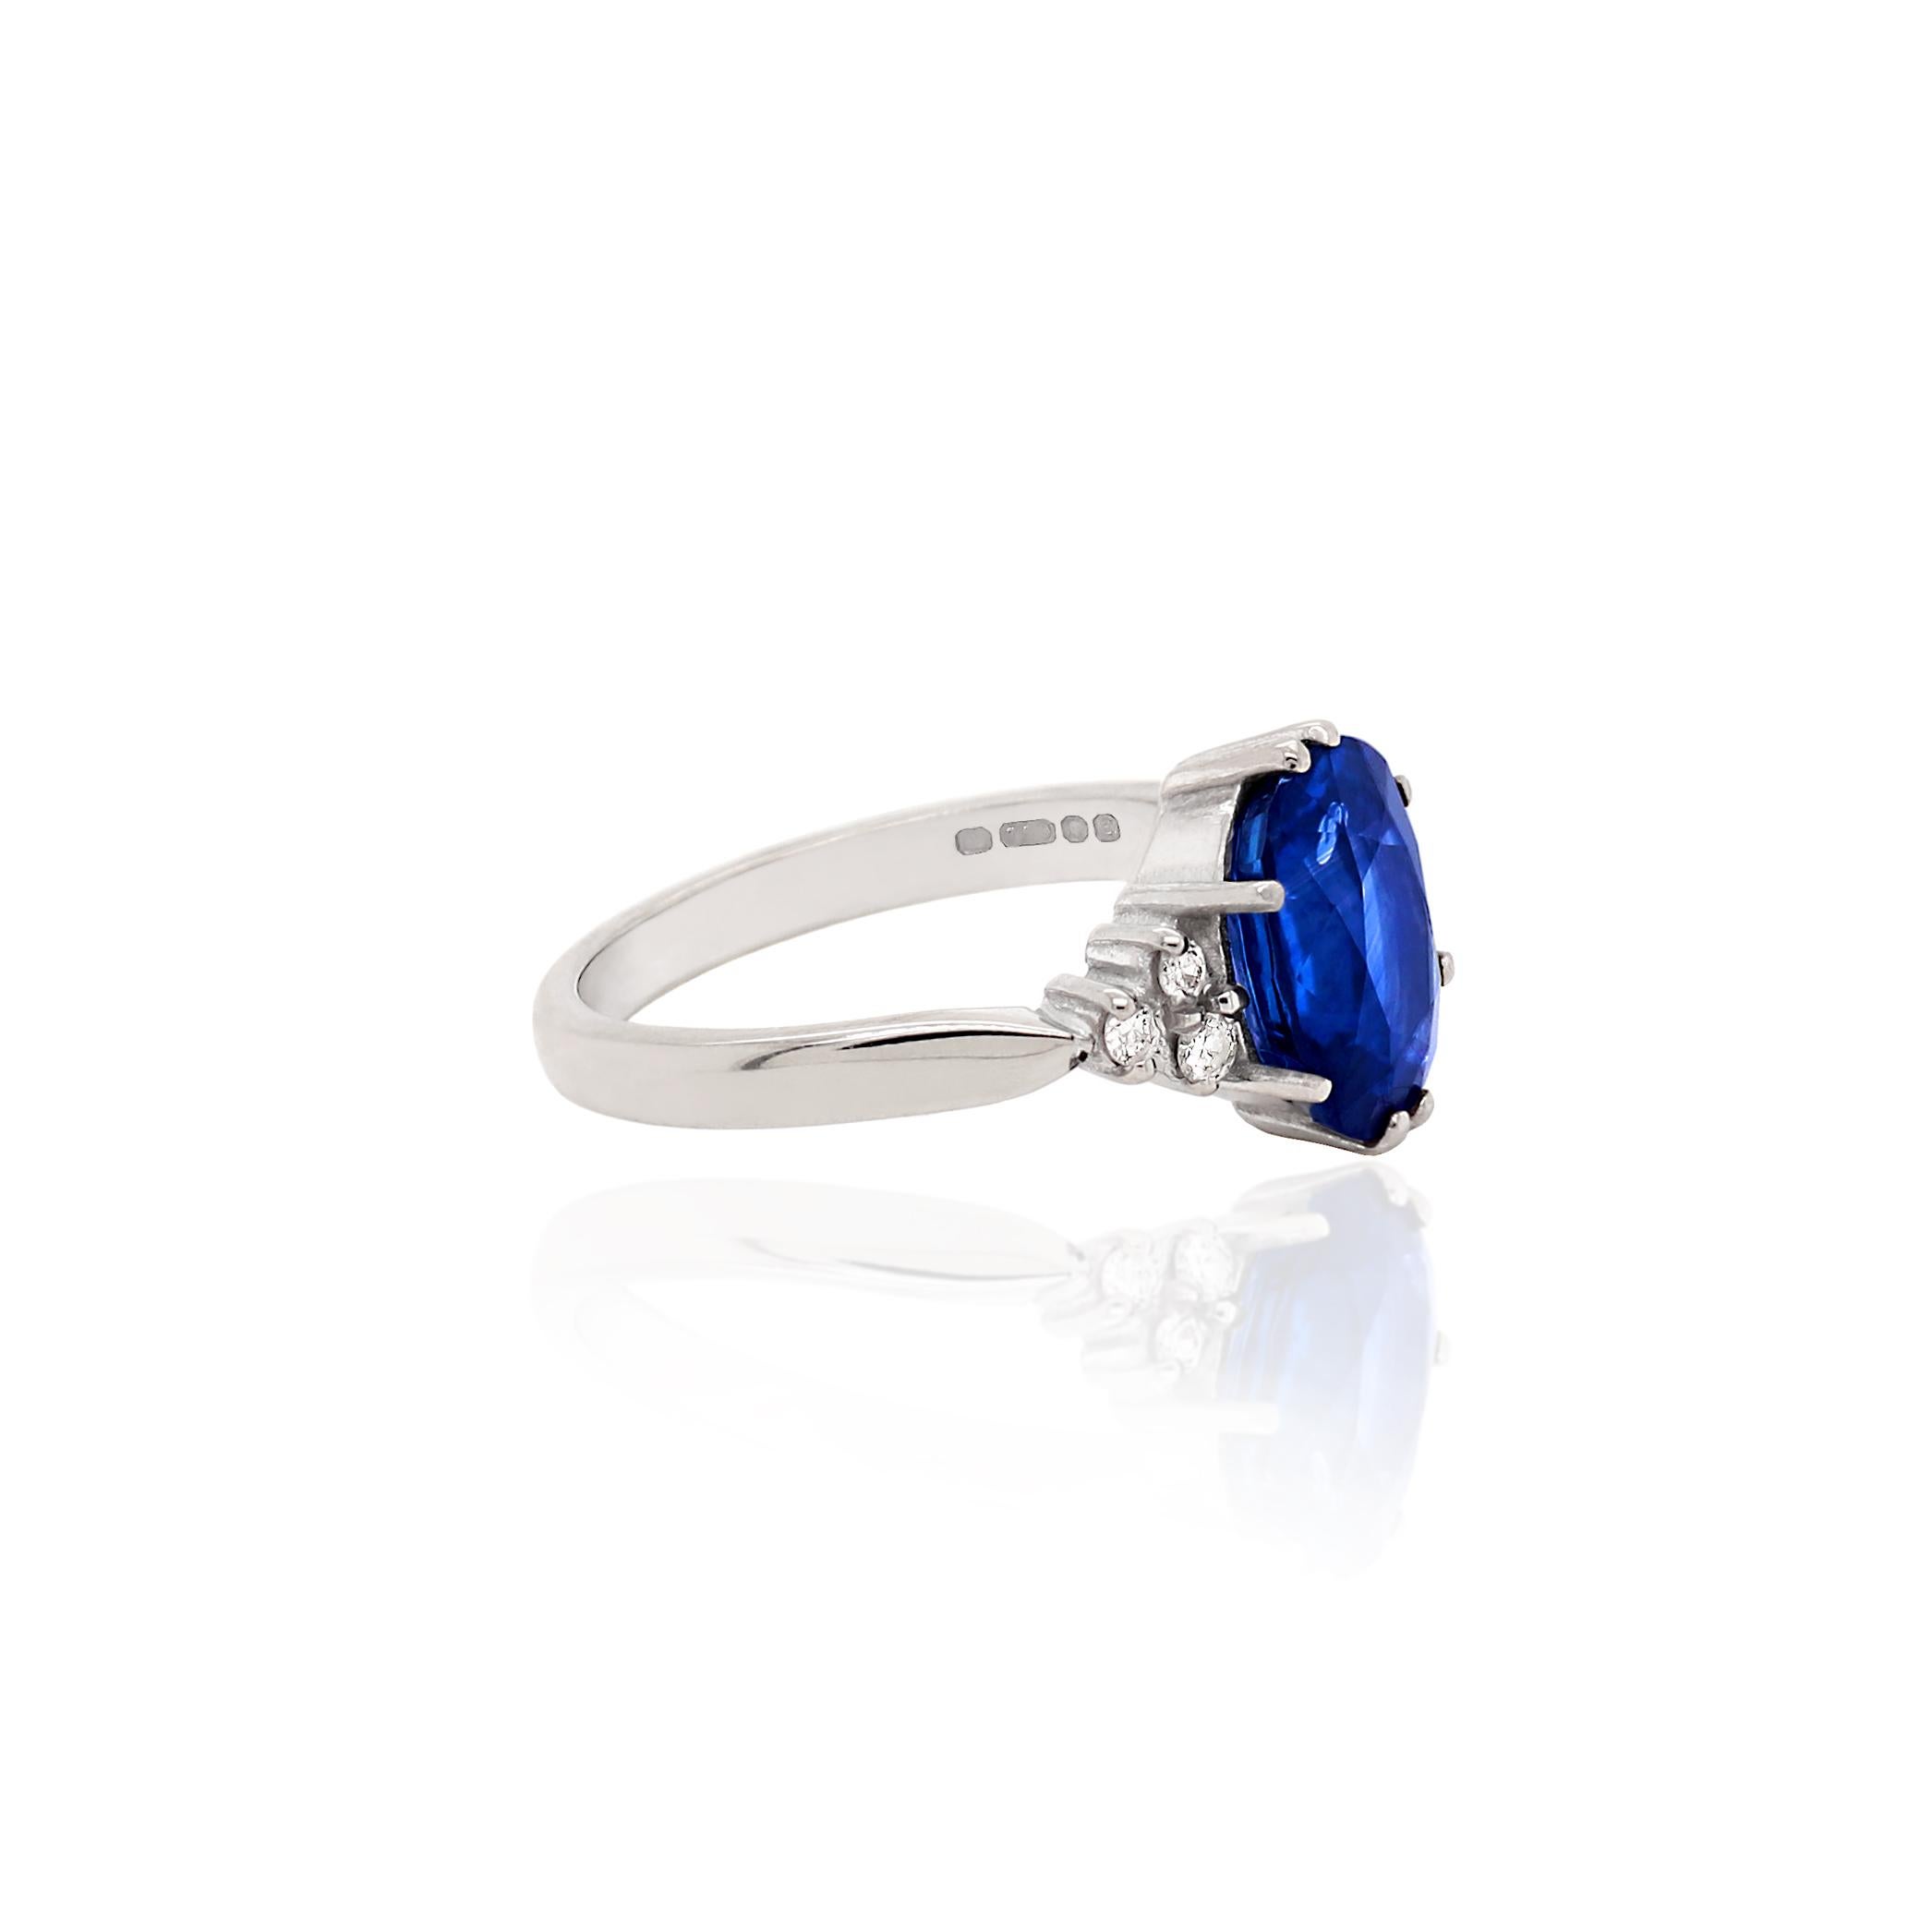 This exquisite ring features a royal blue oval sapphire weighing 3.59ct in an eight claw open back setting. This gorgeous stone is accompanied by three round brilliant cut diamonds on either side weighing a total of 0.12ct in open back claw